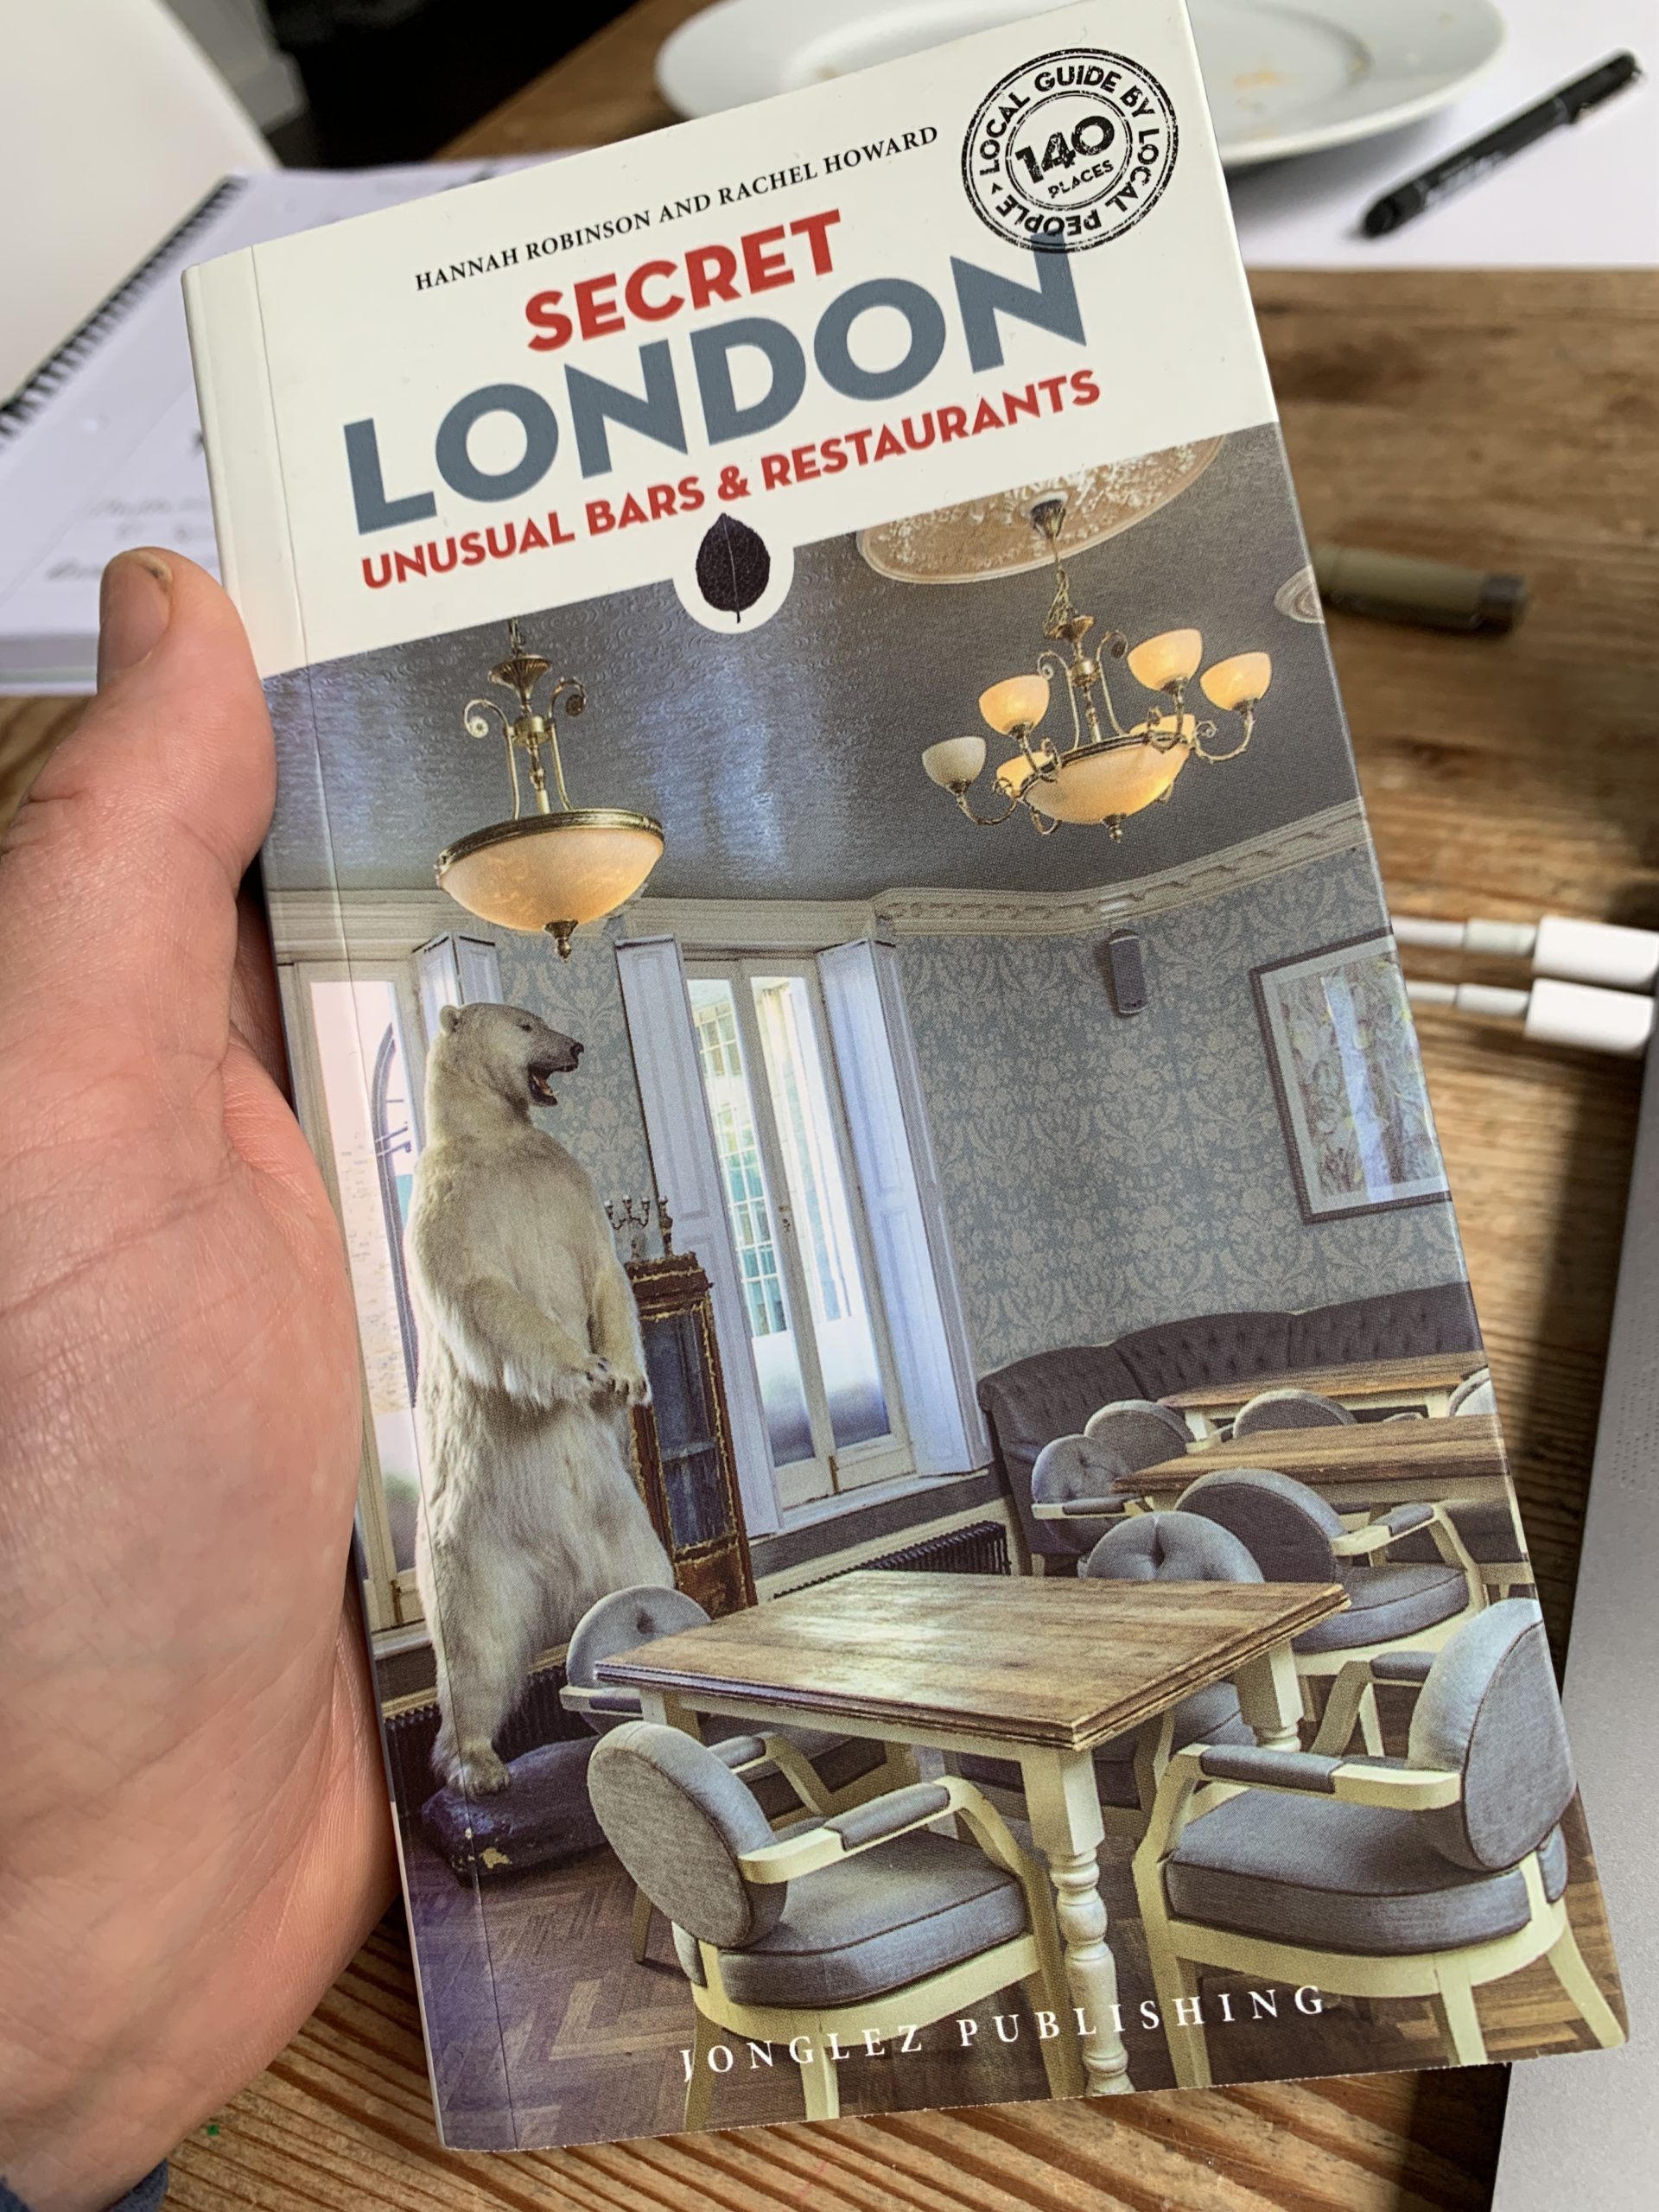 Book on London 